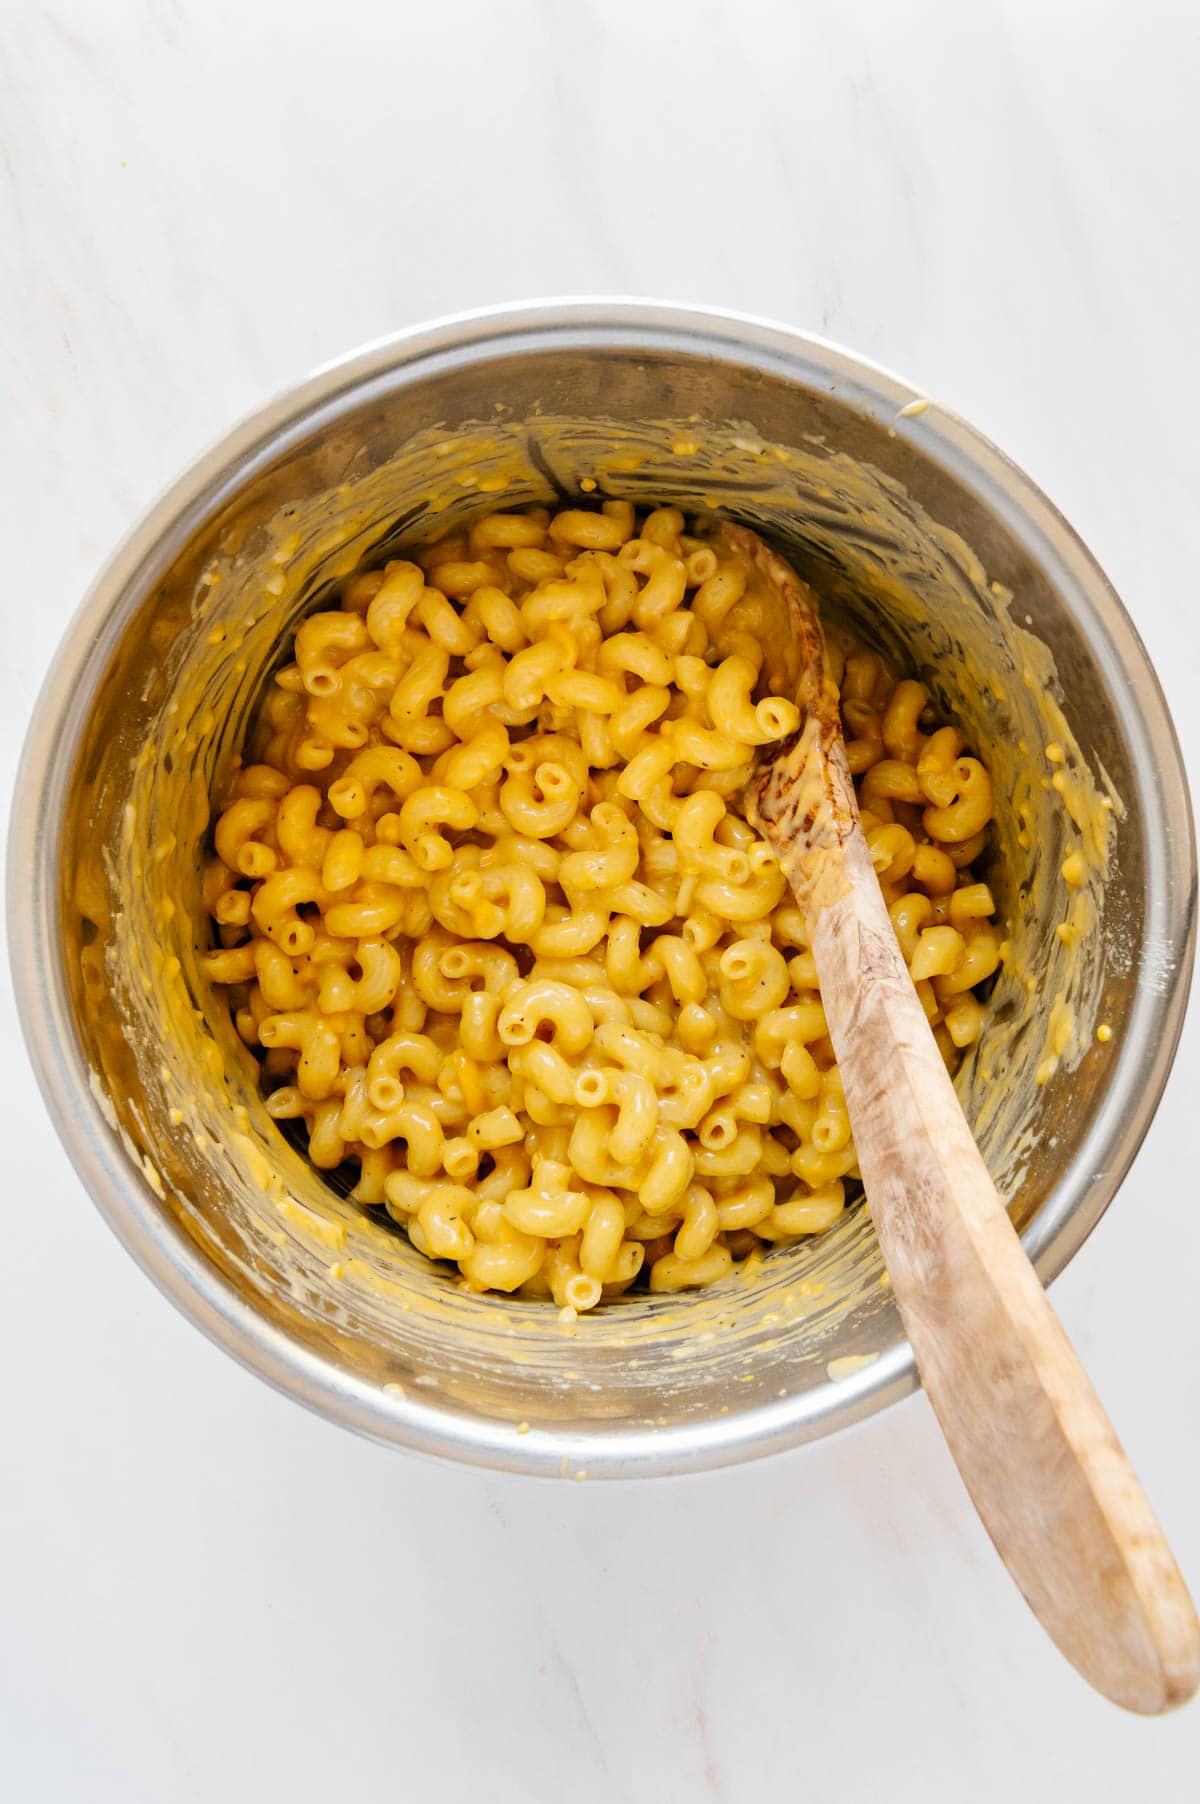 Cheesy vegan mac and cheese finished cooking in an Instant Pot.